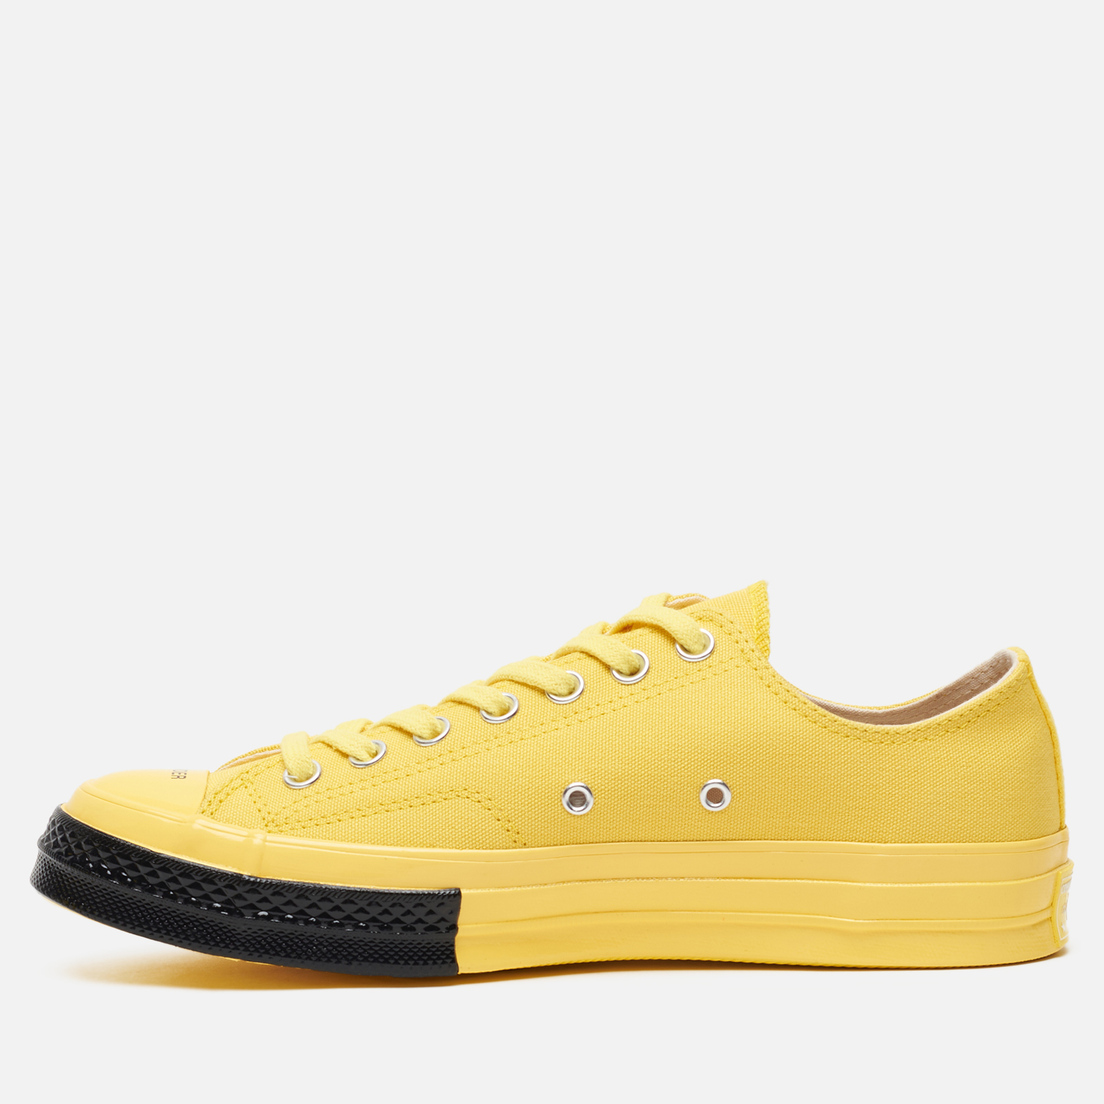 undercover converse low